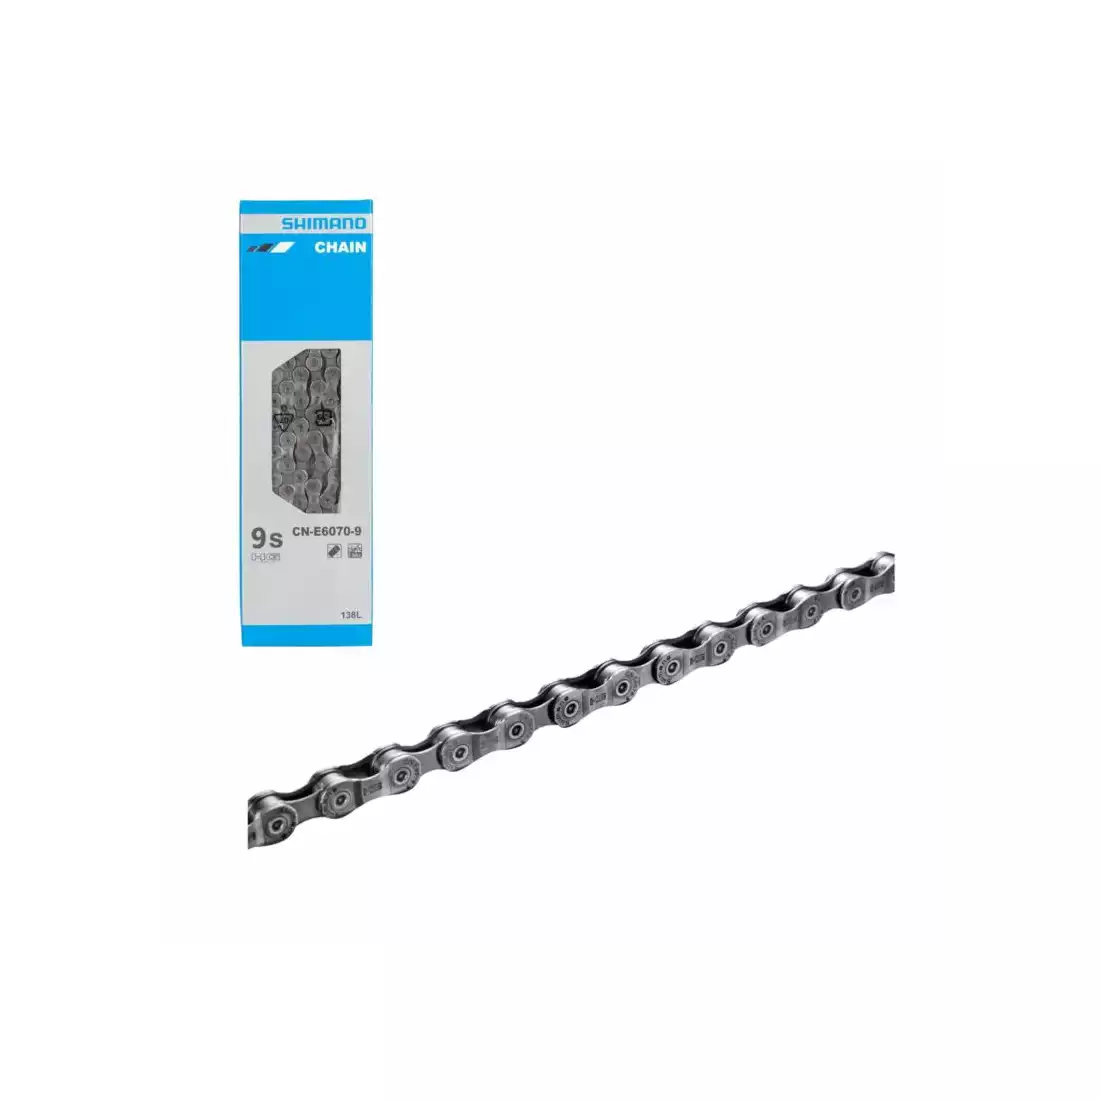 SHIMANO CN-E6070 Bicycle chain, 9-speed, 138 links, silver